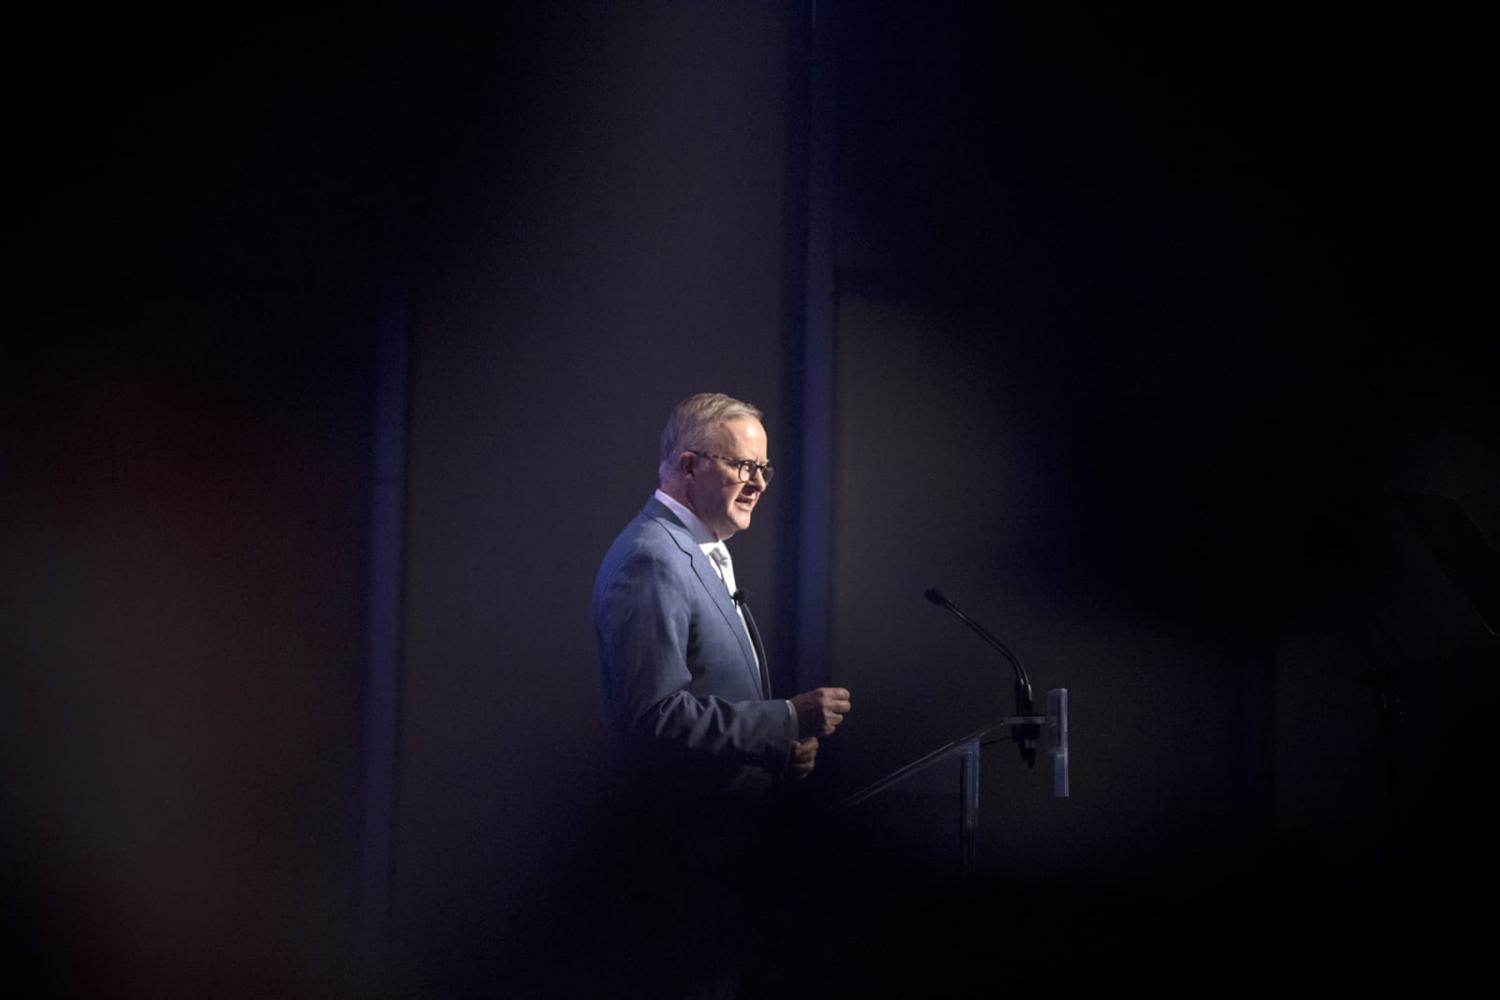 Prime Minister Anthony Albanese headed to the Quad summit within days of taking power and a NATO meeting shortly after (Brent Lewin/Bloomberg via Getty Images)